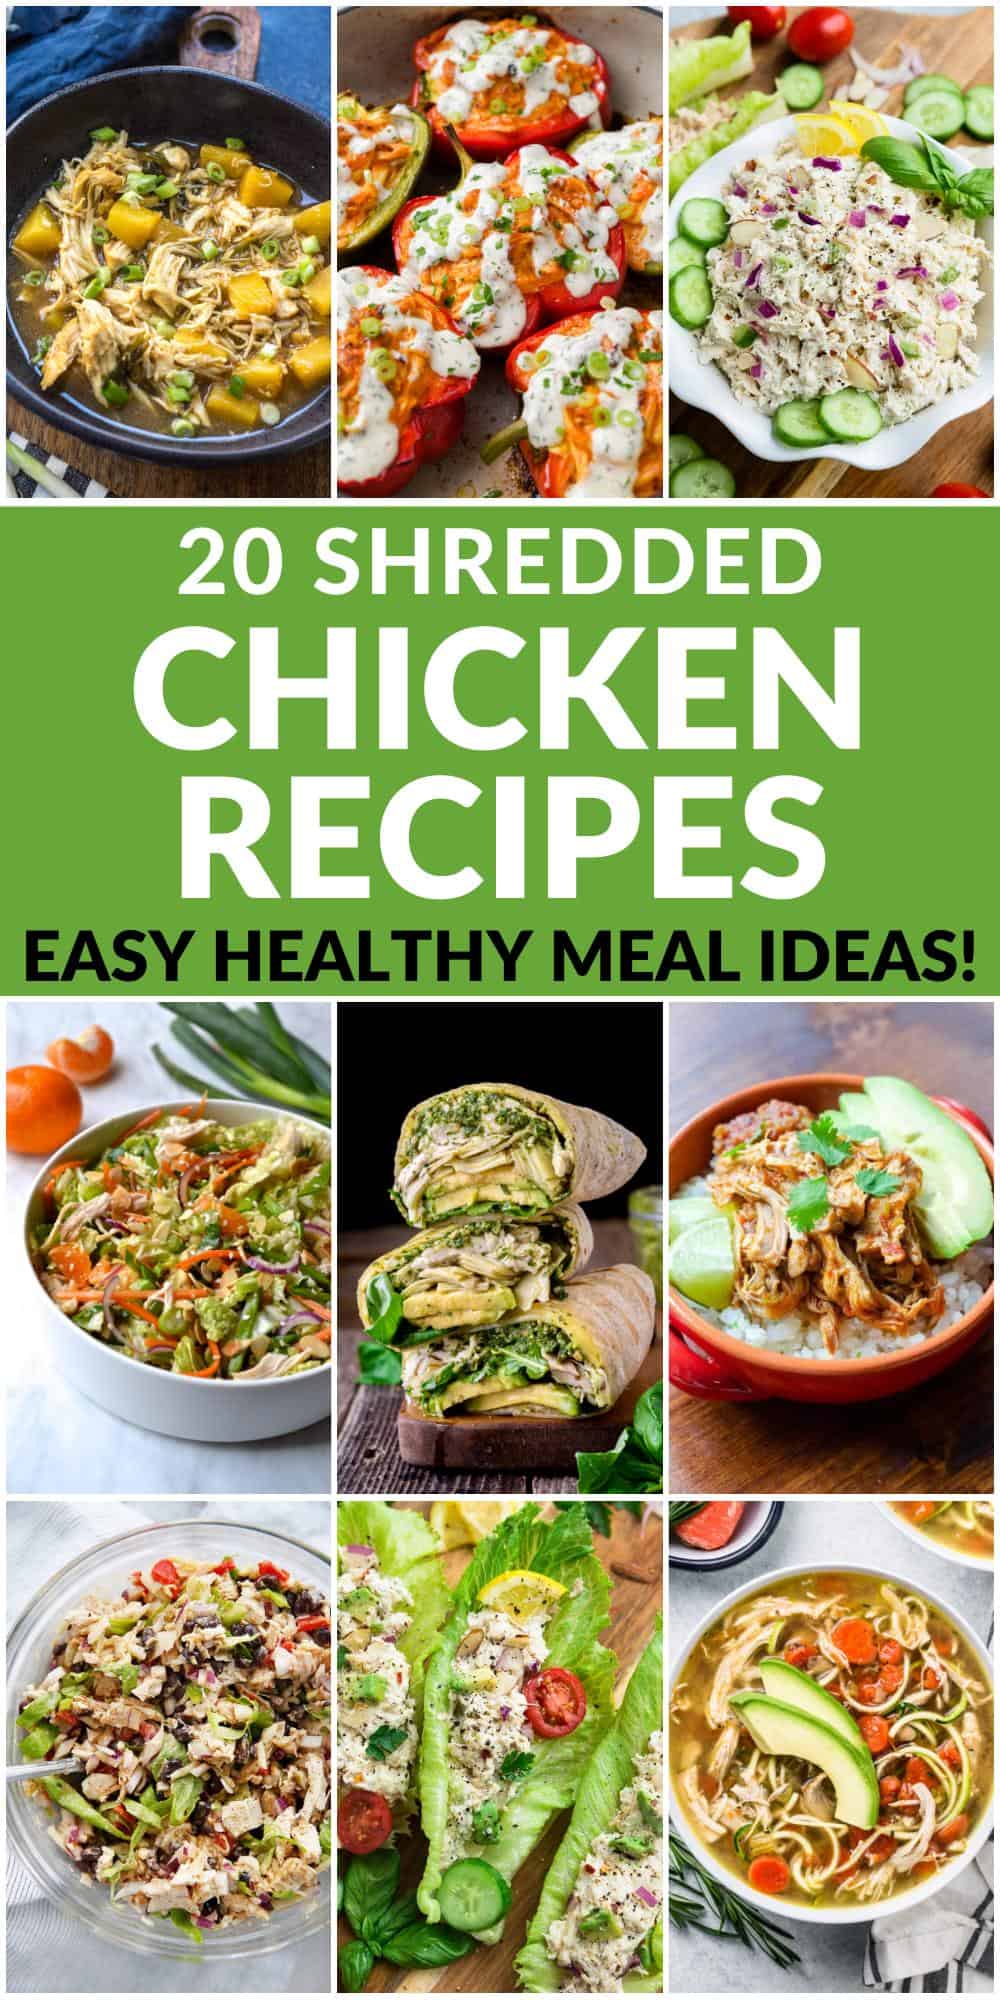 20 Easy And Healthy Shredded Chicken Recipes - Cook Eat Well